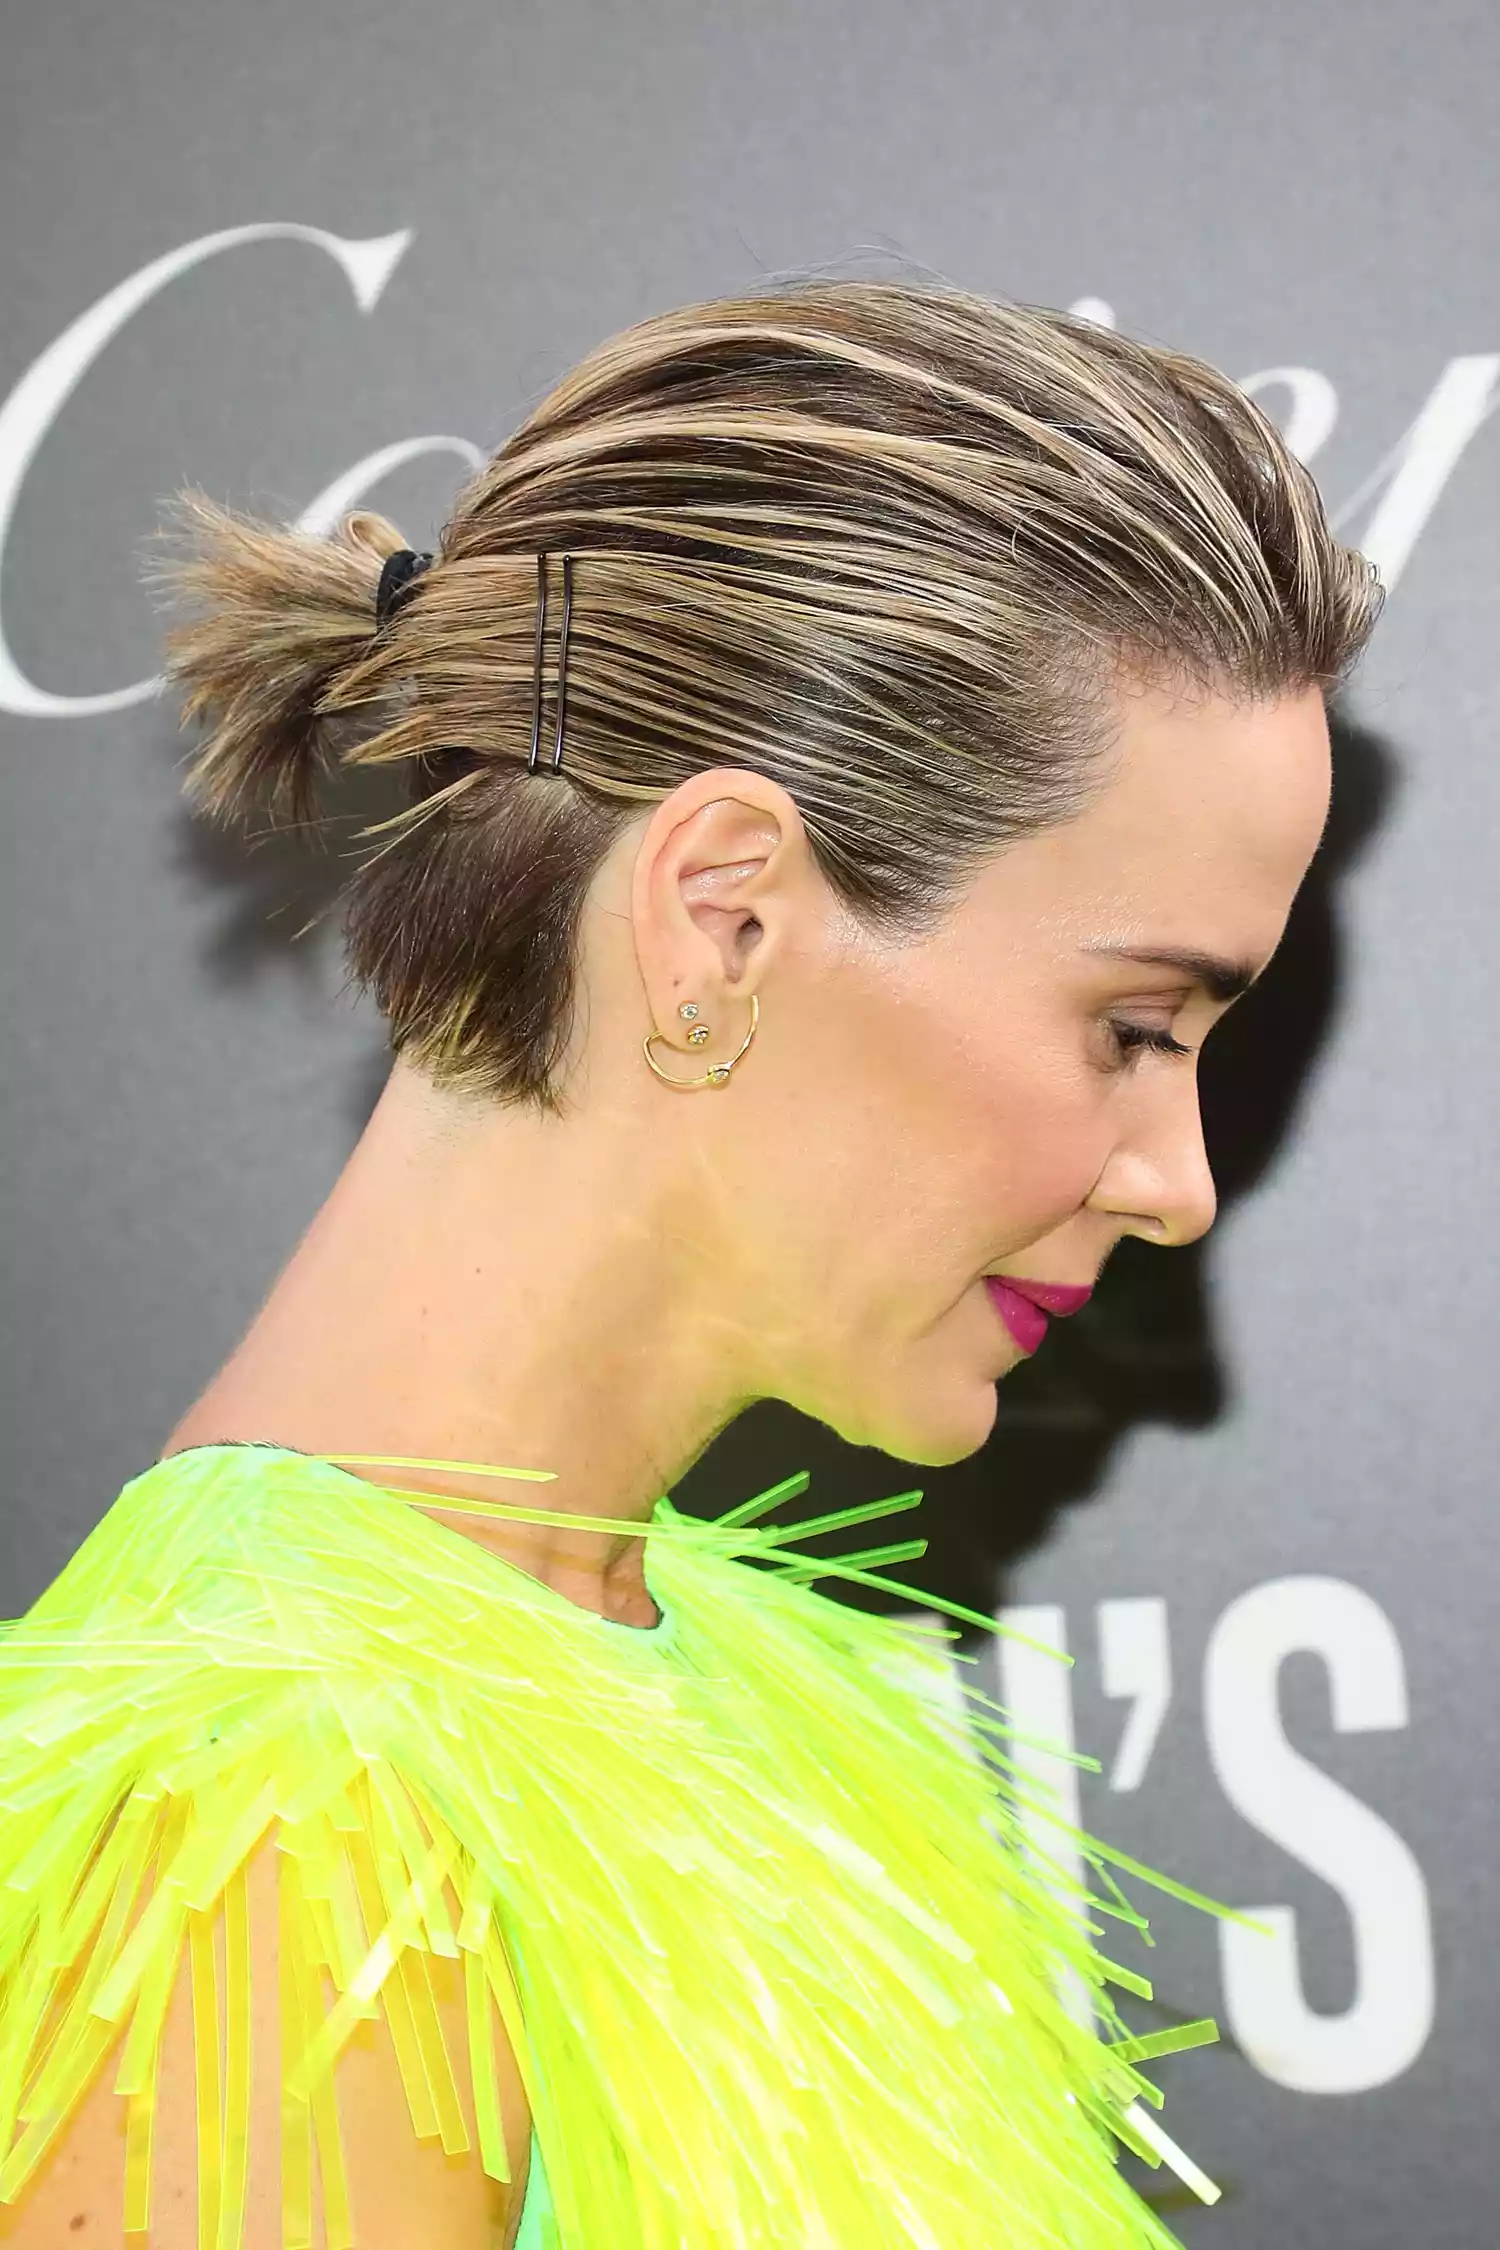 Best Short Hair Ponytail Hairstyles to Try: Pinned Back